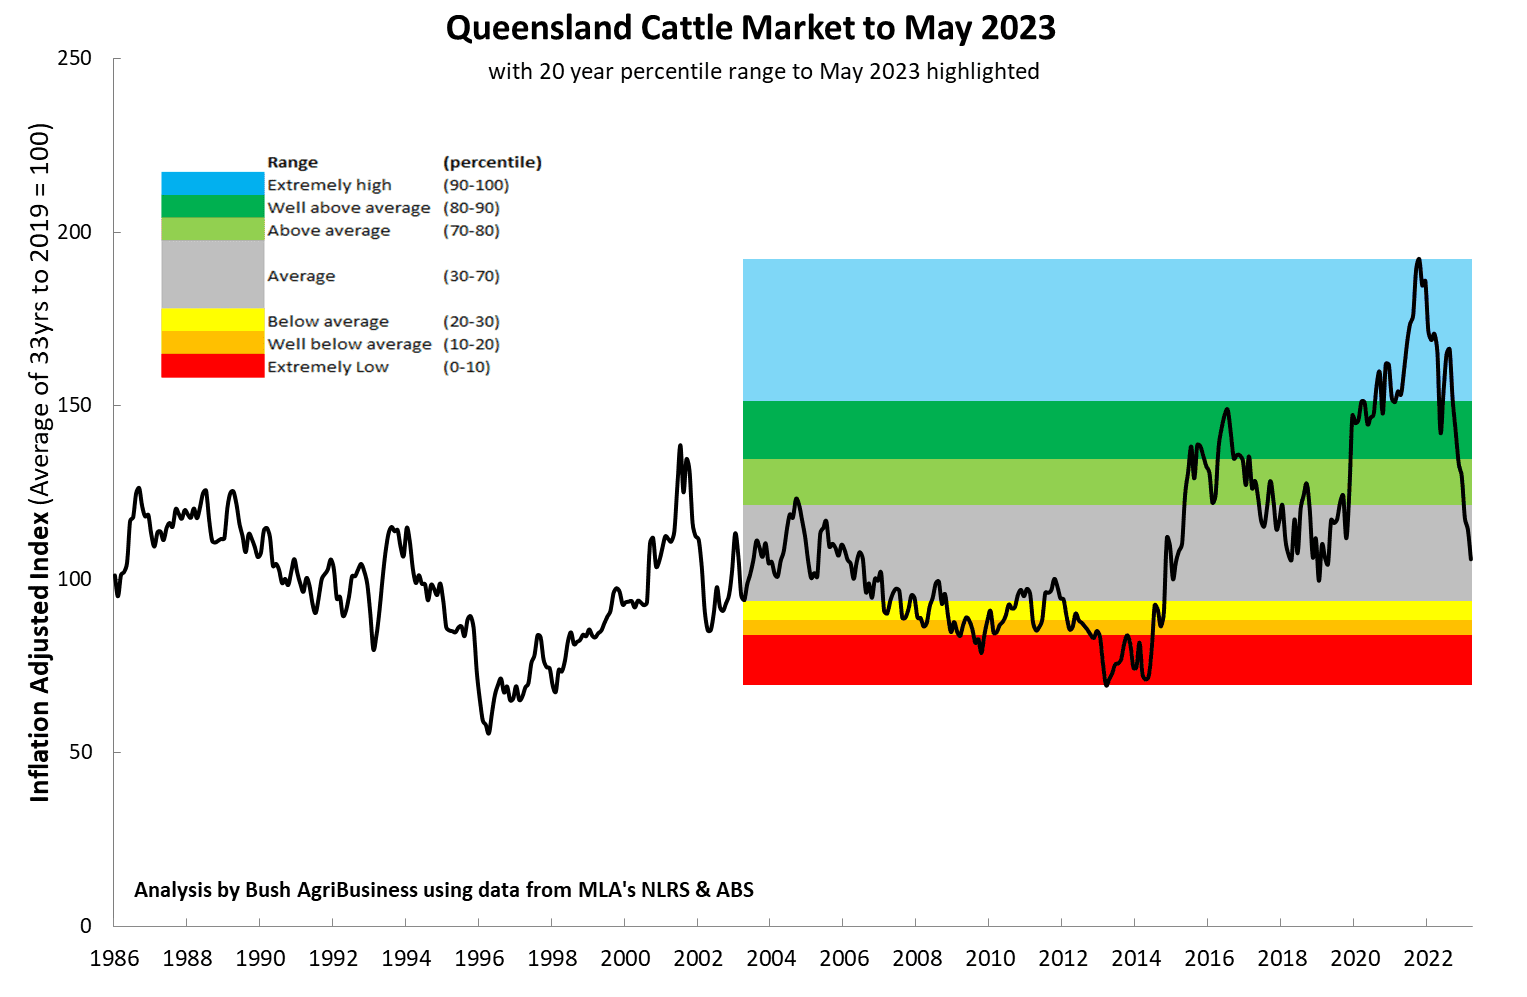 A 20-year perspective on cattle prices